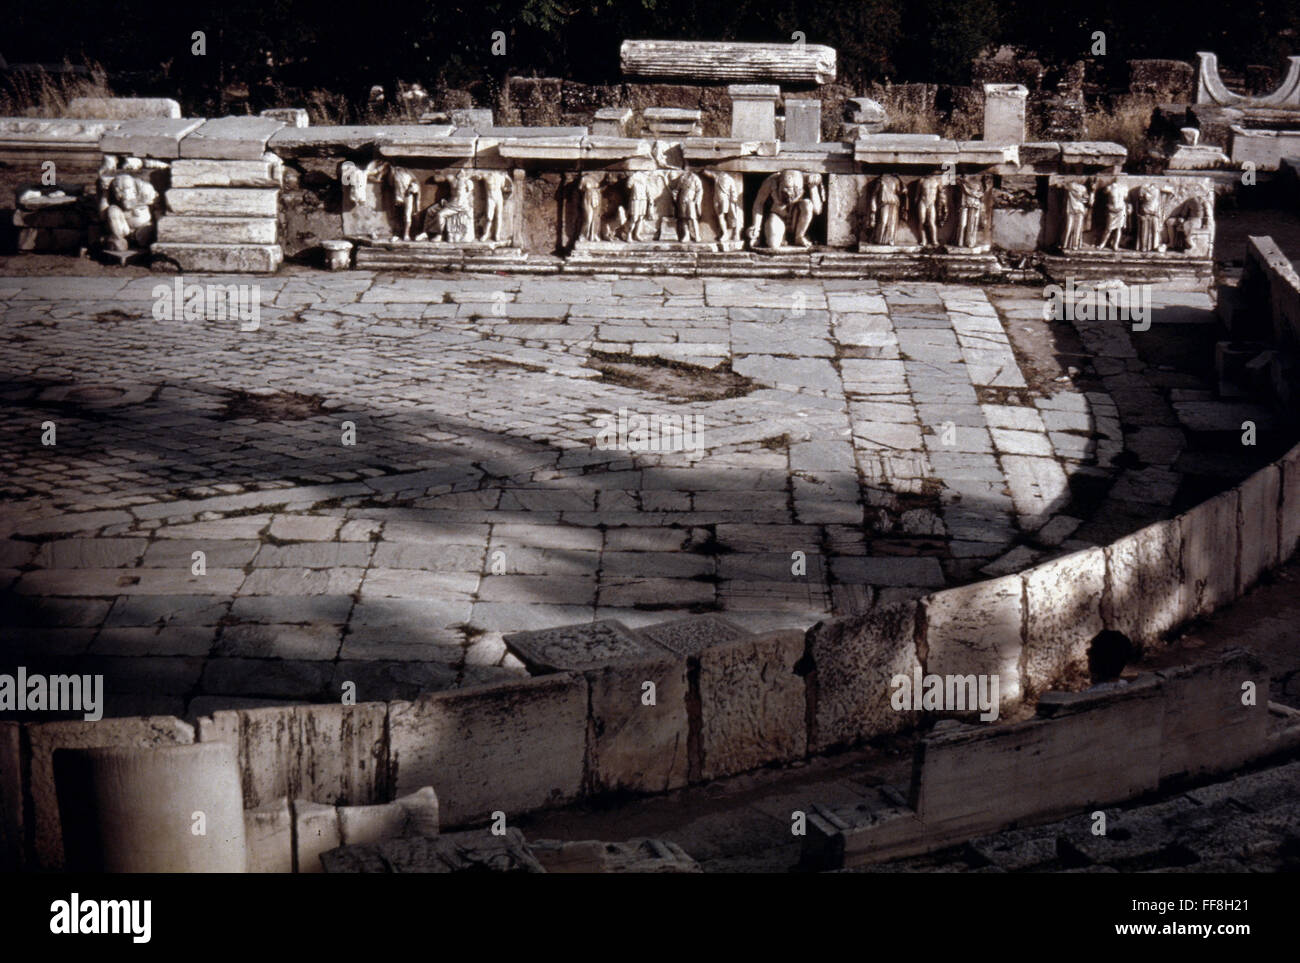 GREECE: ATHENS: /nStage of the Theater of Dionysus. Stock Photo